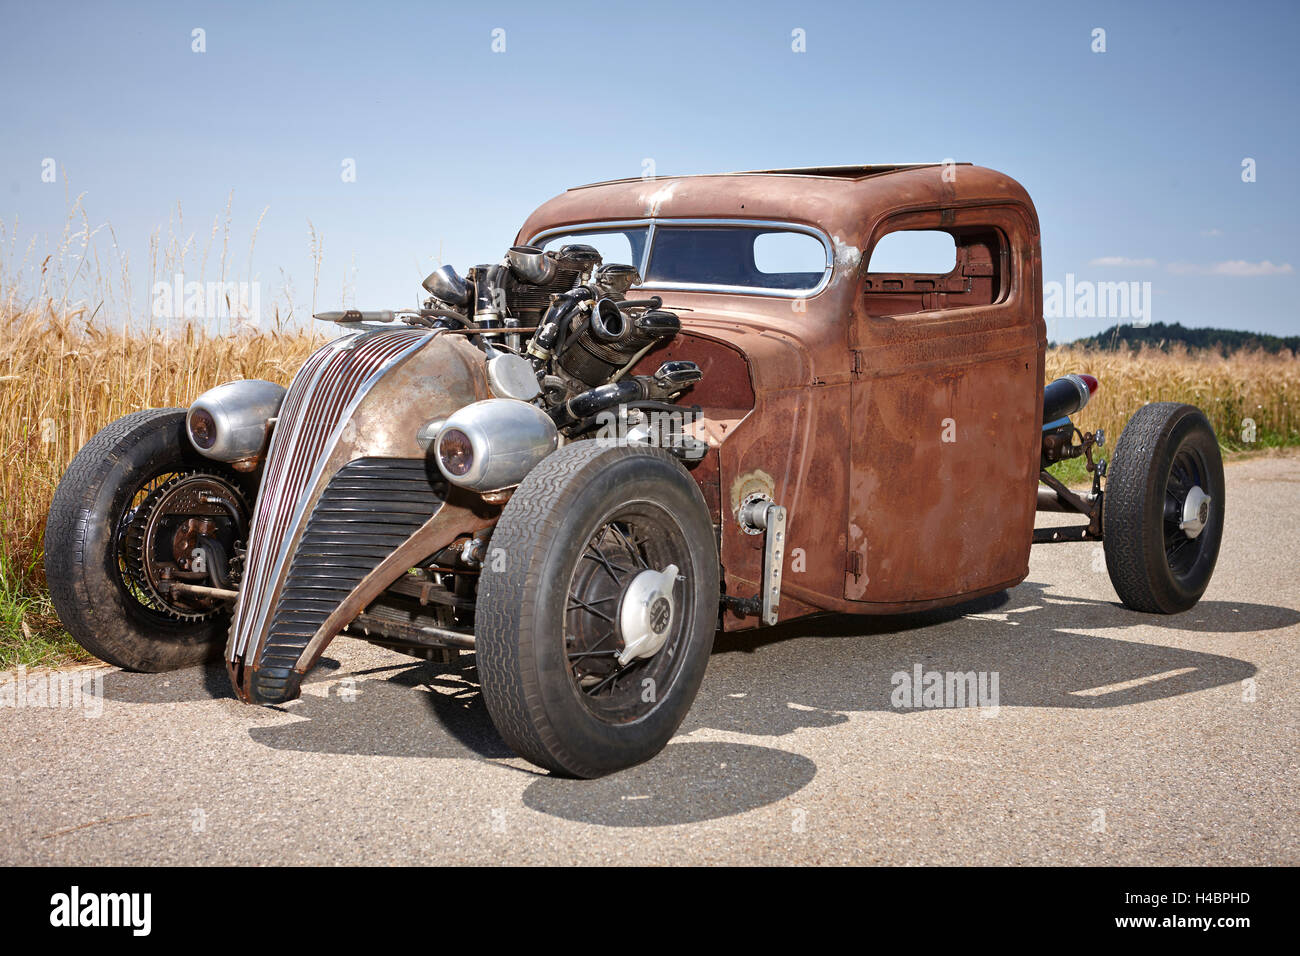 Hot-Rod, Rat-Rod, self-built with airplane radial engine Stock Photo